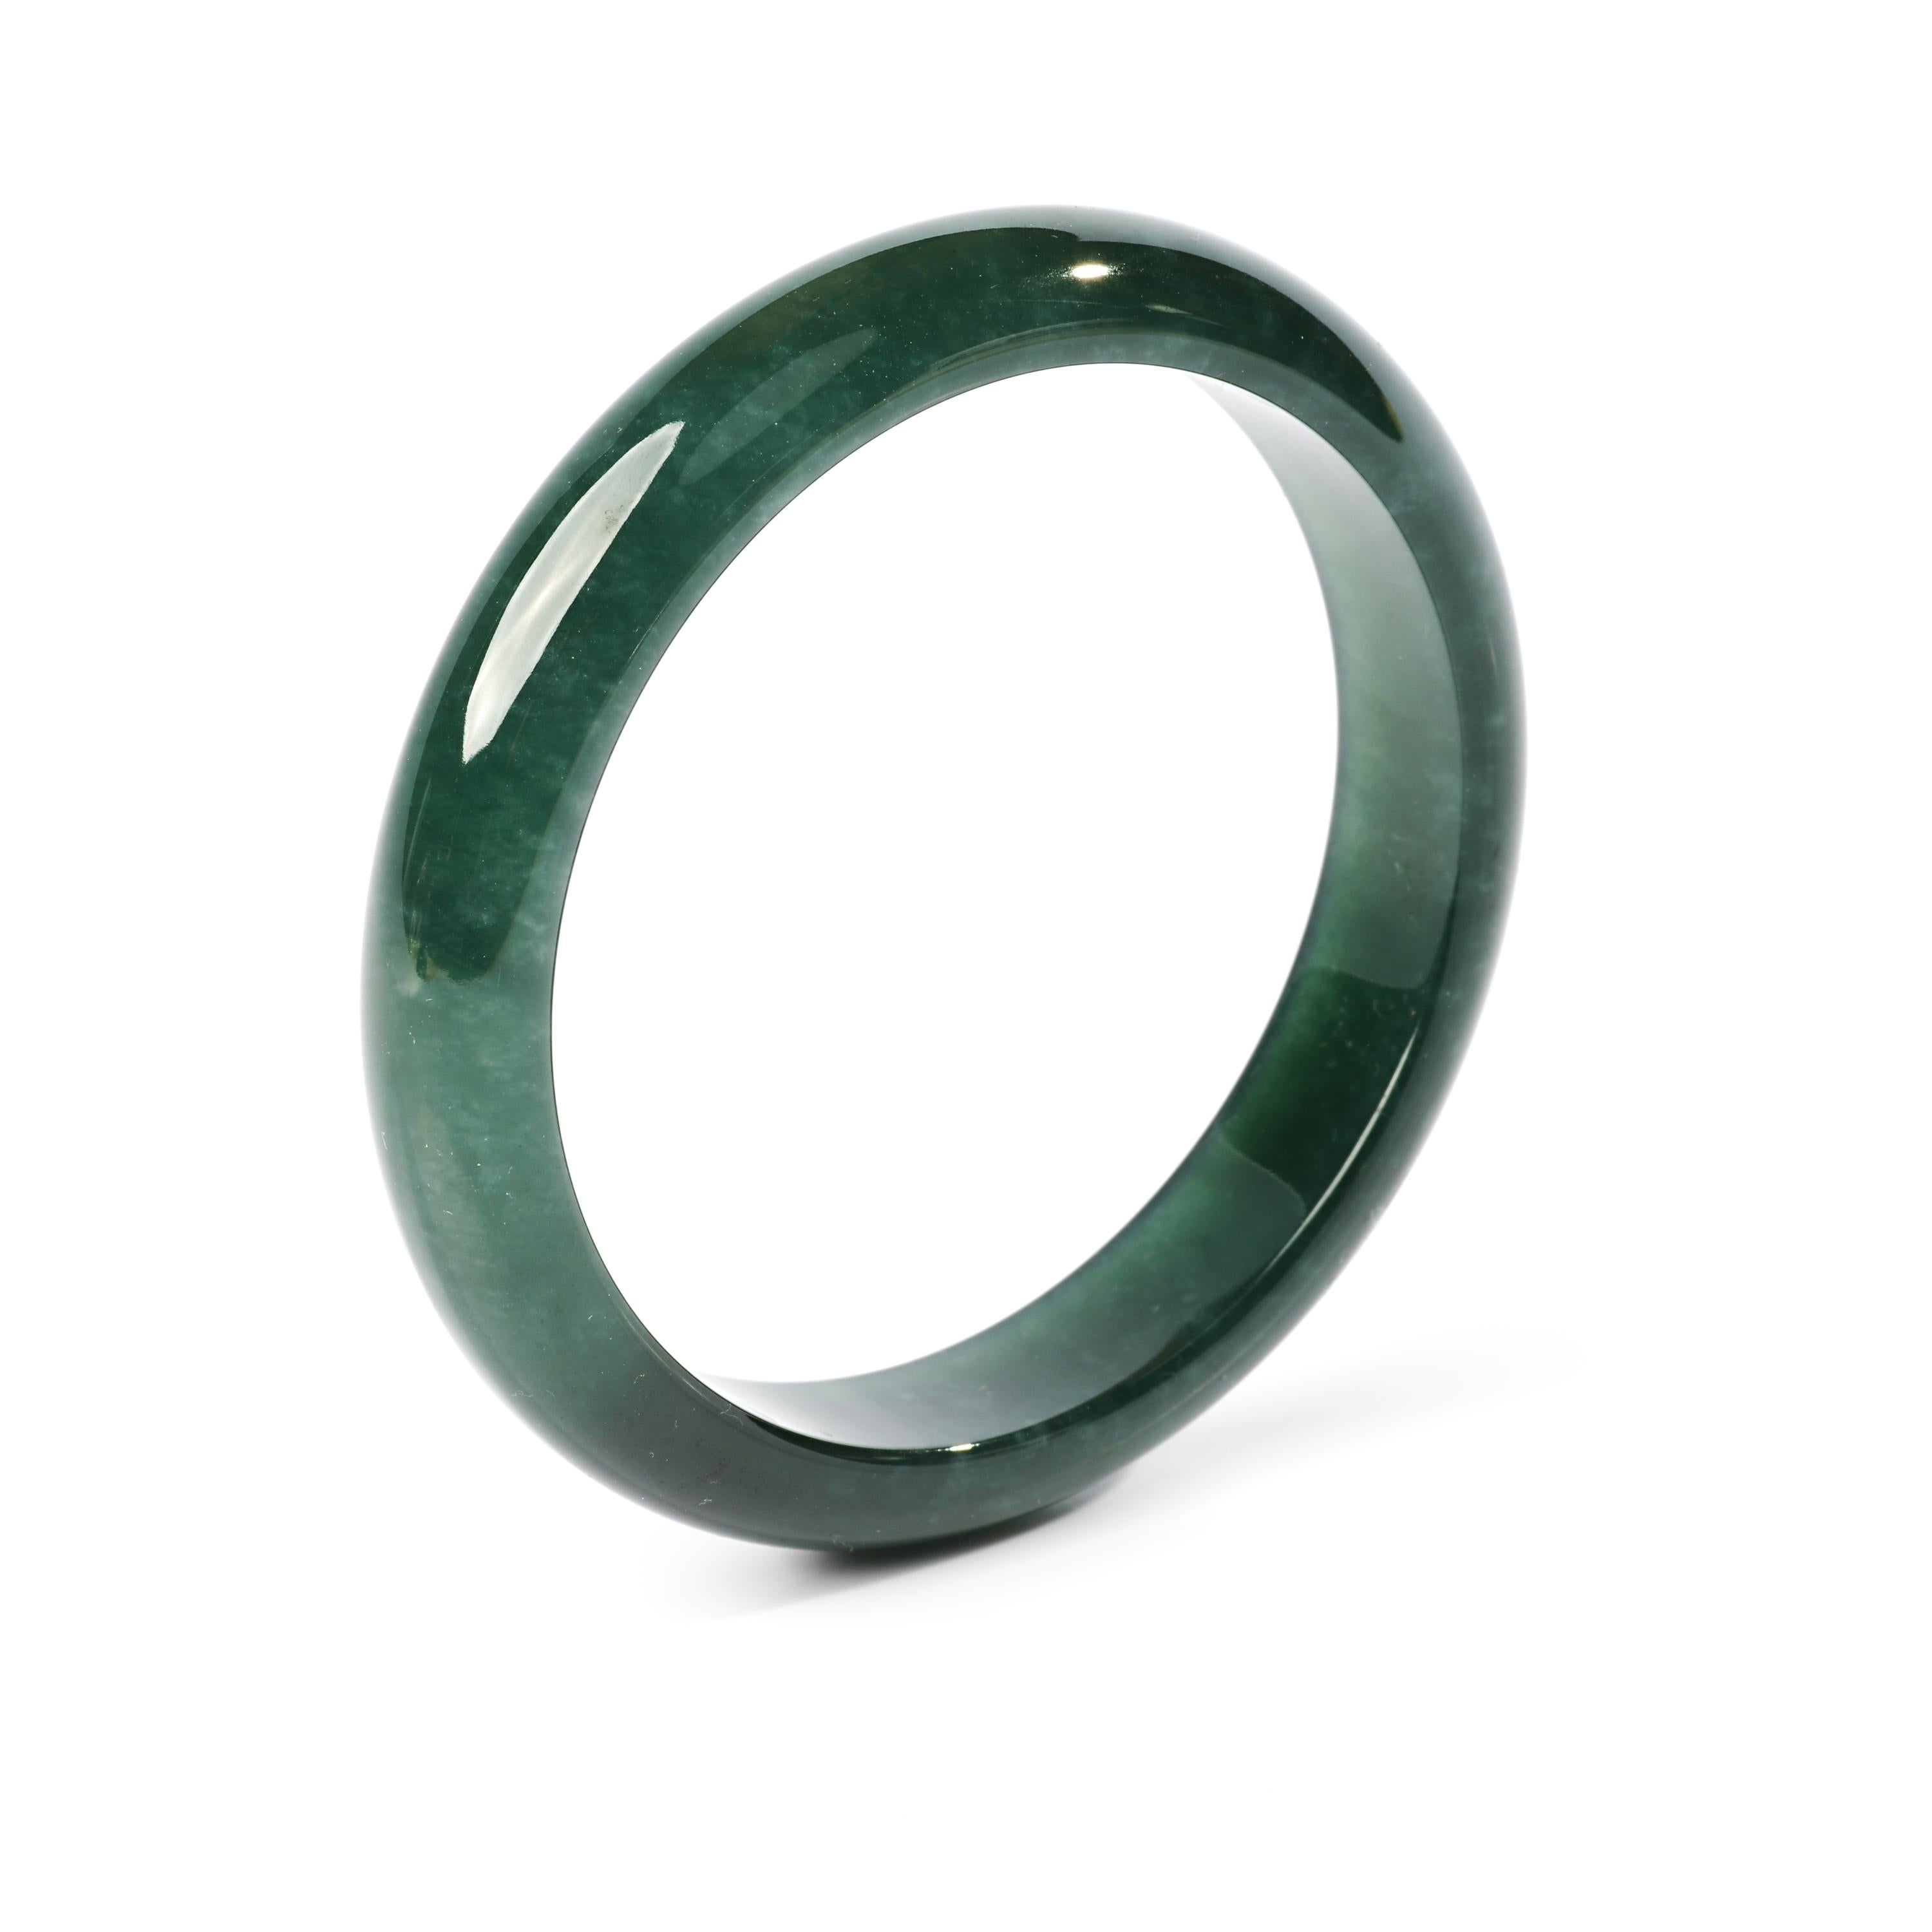 This bluish-green jadeite jade bangle is so translucent it looks like glass. It's the color of the ocean off the coast of Big Sur, California. If it fit me I would never take it off. 

Carved to perfection, this gorgeous and rare bangle has an inner